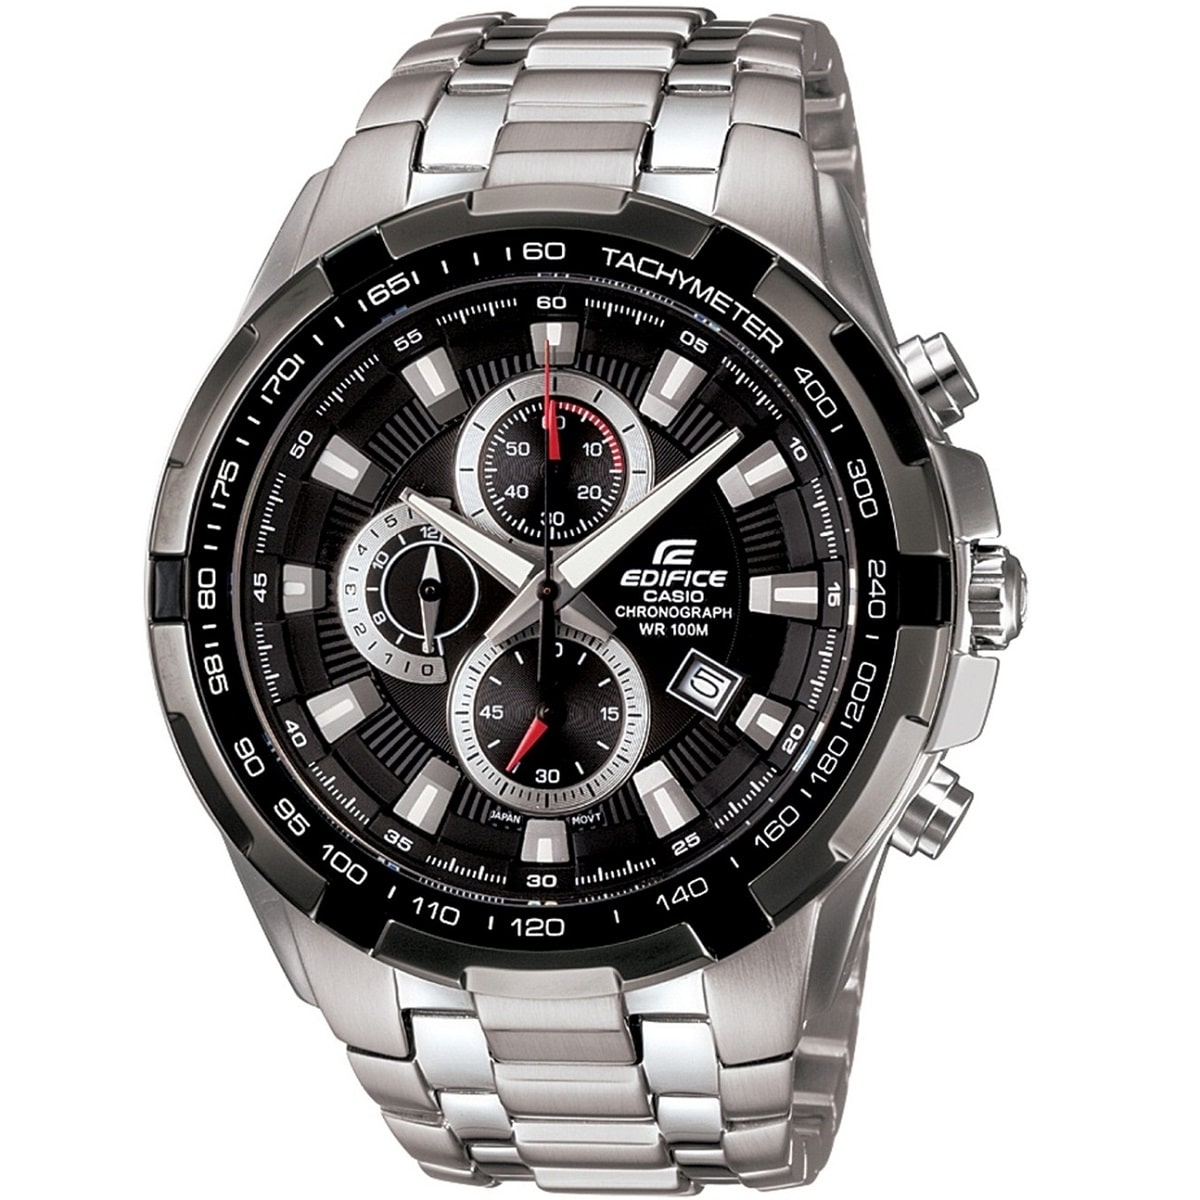 CASIO EDIFICE CHRONOGRAPH WATCH EF539D1AV 908 BLACK WITH STAINLESS